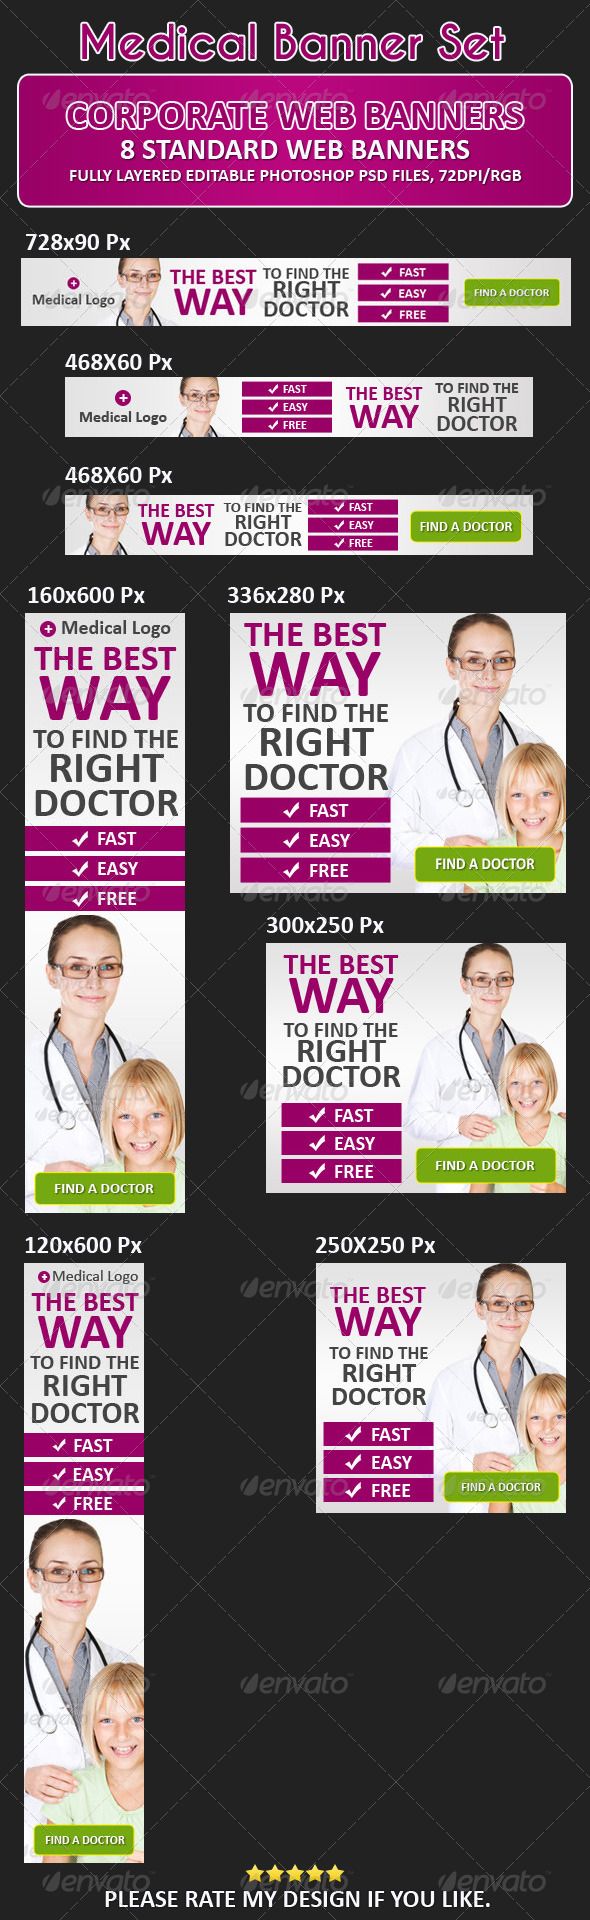 Healthcare-Advertising-Medical-Banners-GraphicRiver-Font-Used-Calibri-.cufonfonts-enfont Healthcare Advertising : Medical Banners #GraphicRiver Font Used: Calibri .cufonfonts /en/font/12048/cali...